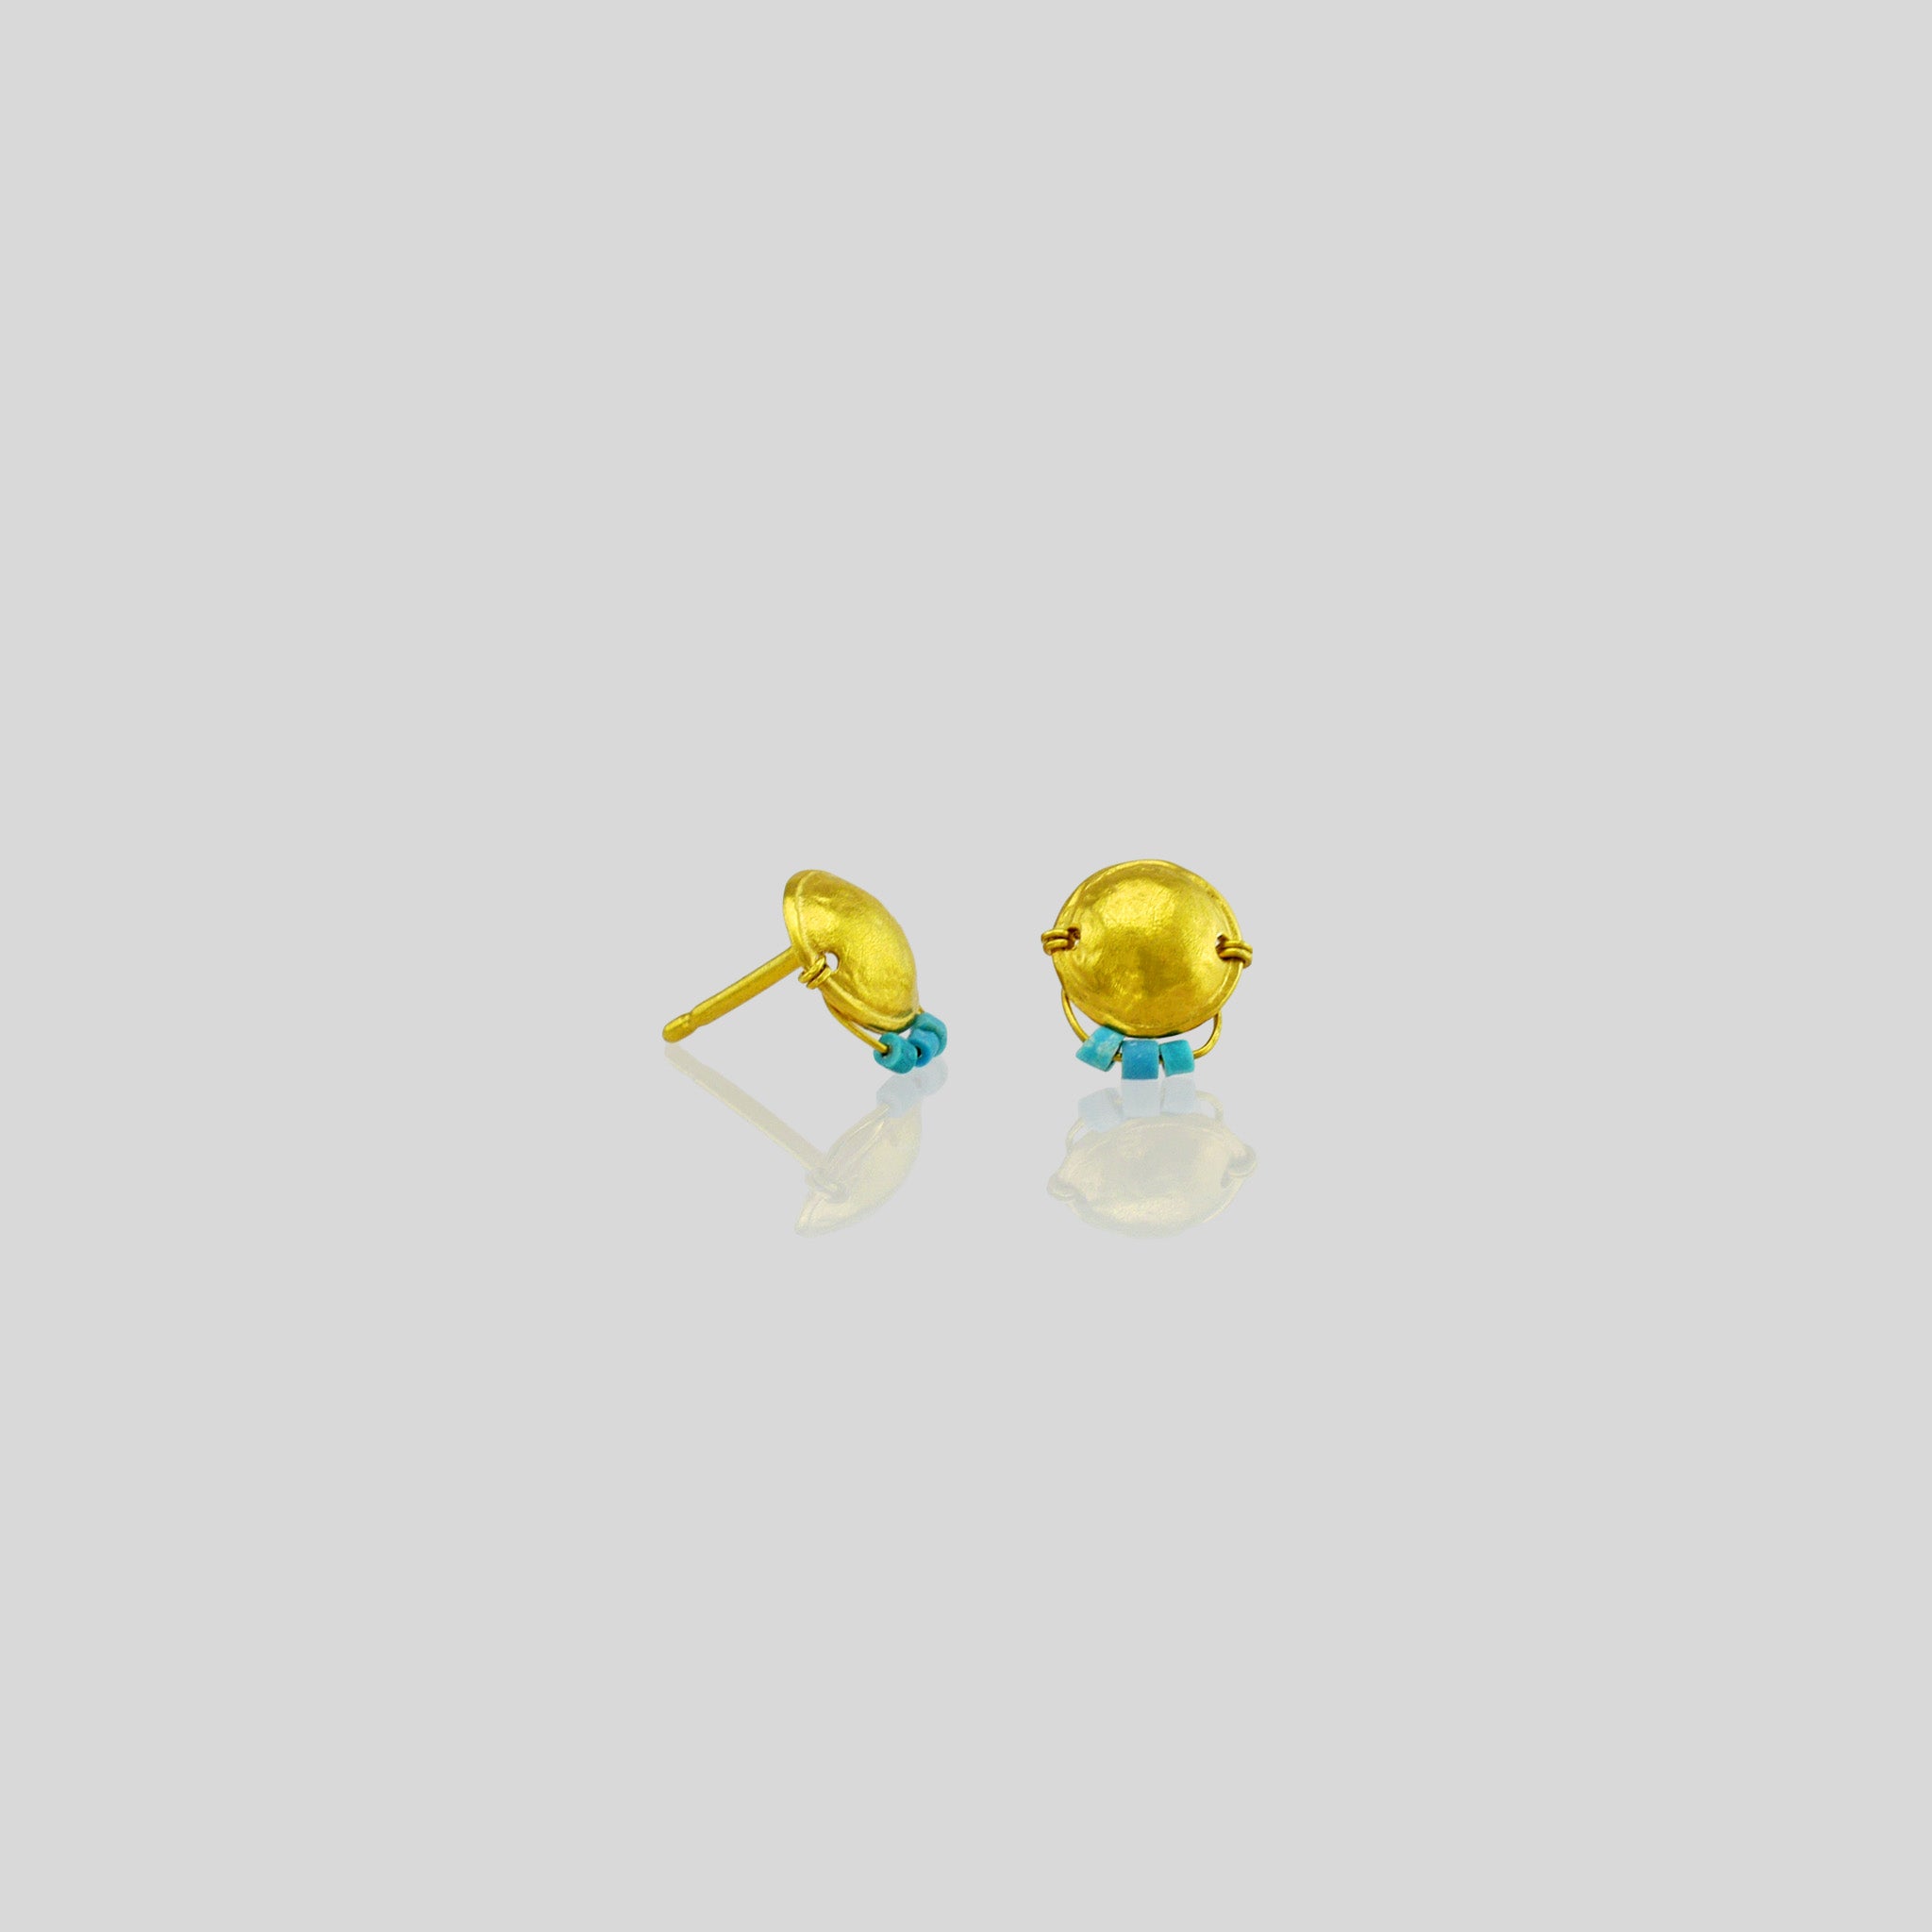 Handmade gold stud earrings featuring an arched disk adorned with a golden thread and tiny turquoise beads hanging on a golden bow. 